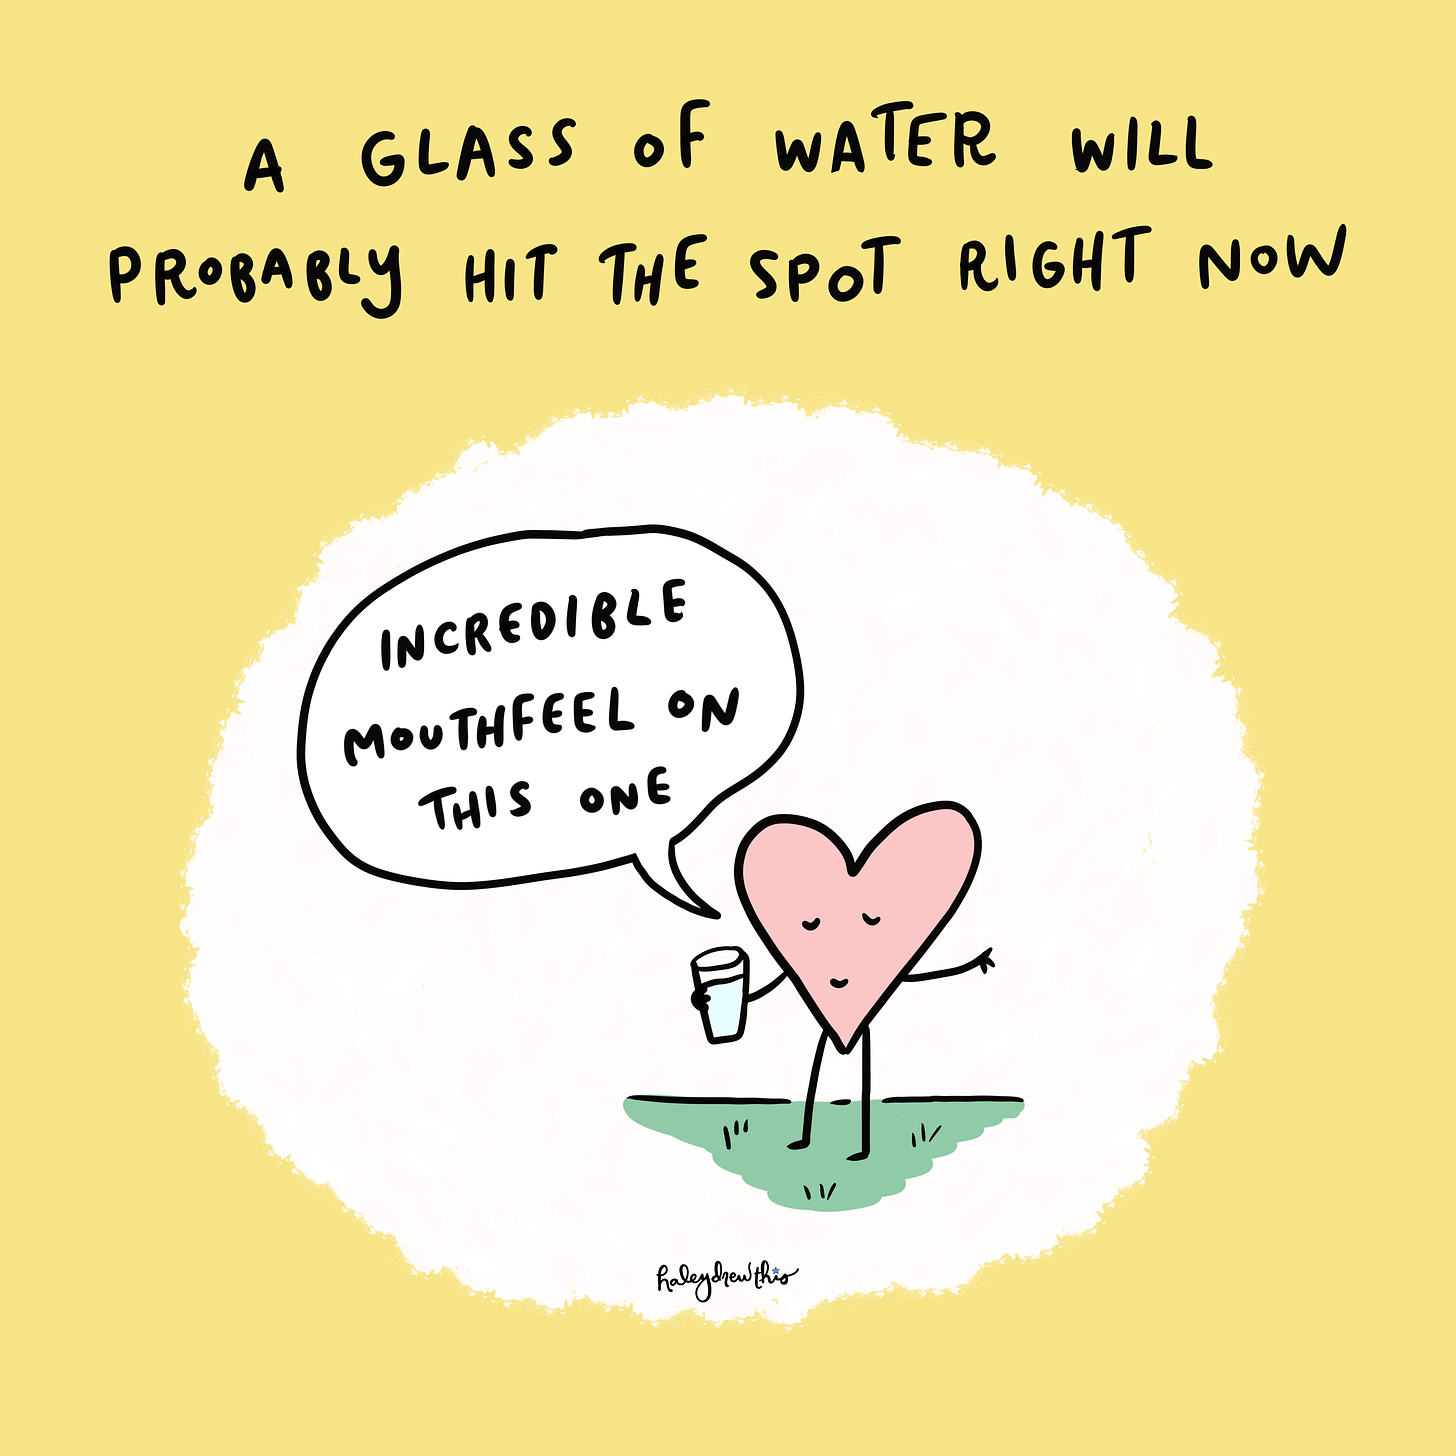 Title: A glass of water will probably hit the spot right now. Heart drinking water saying, "incredible mouthfeel on this one"